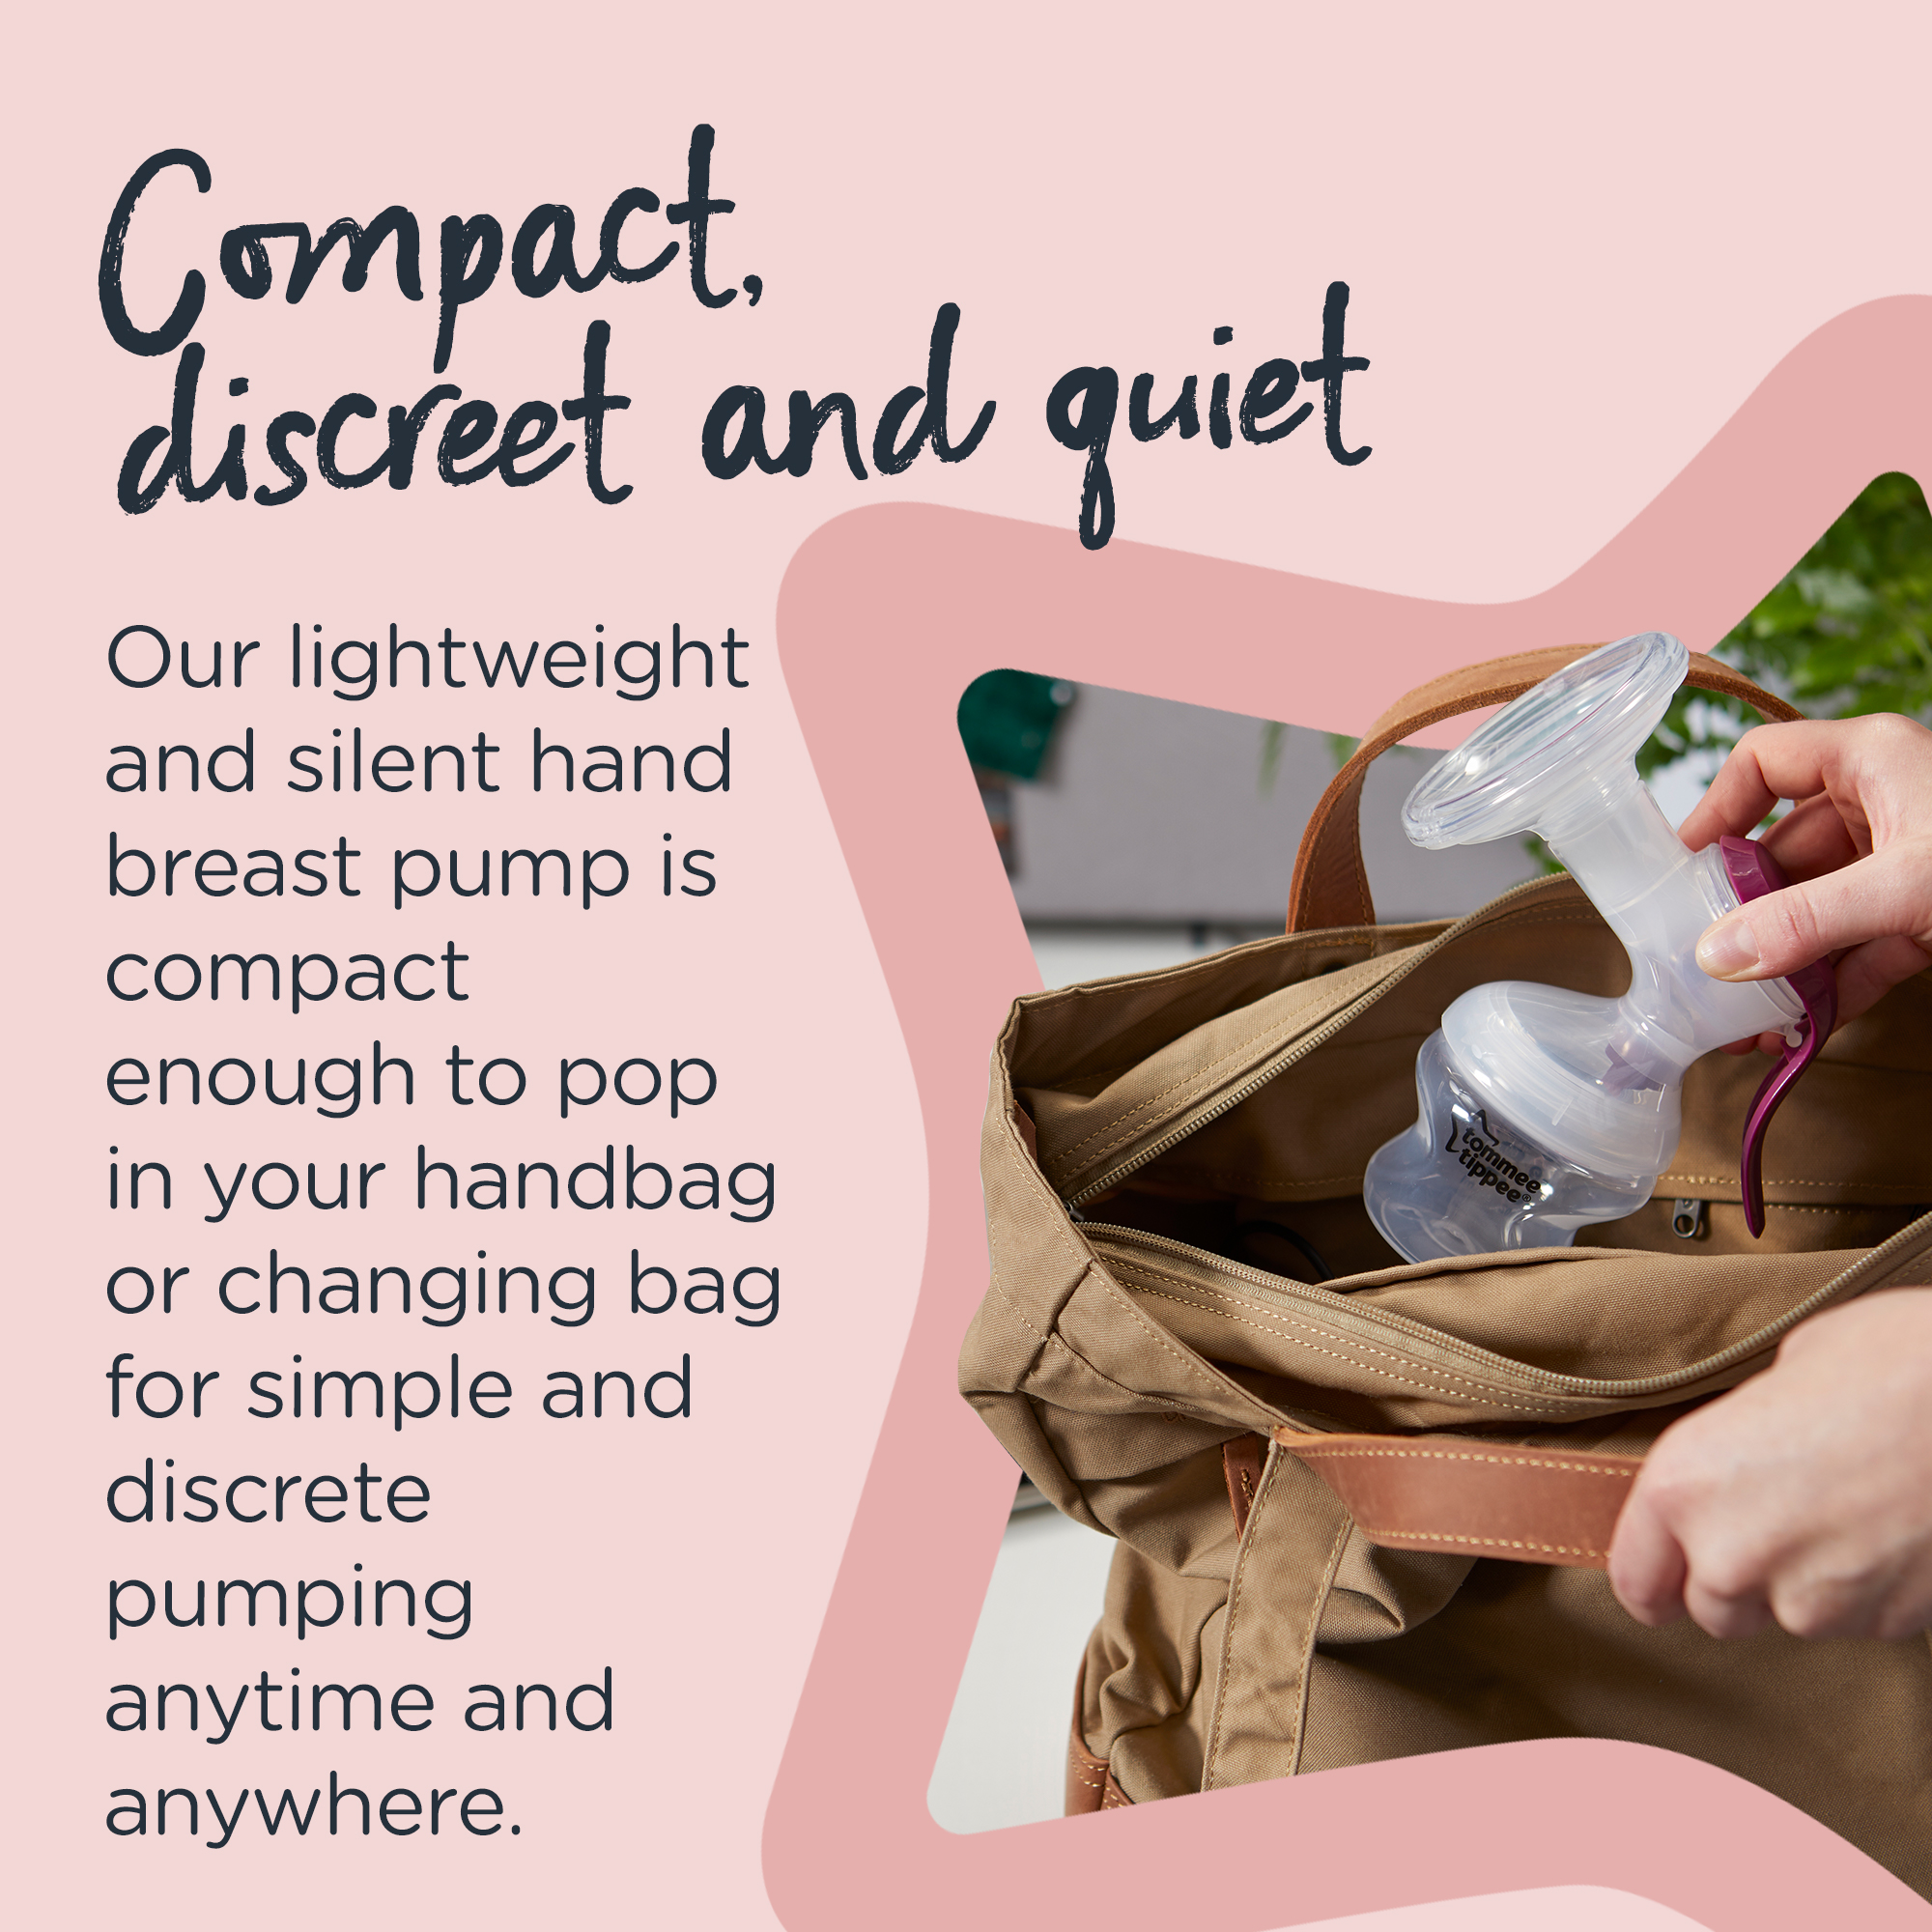 Tommee Tippee Made for Me Single Manual Breast Pump | Soft, Cushioned Silicone Cup | Reduced Hand Strain - image 5 of 8